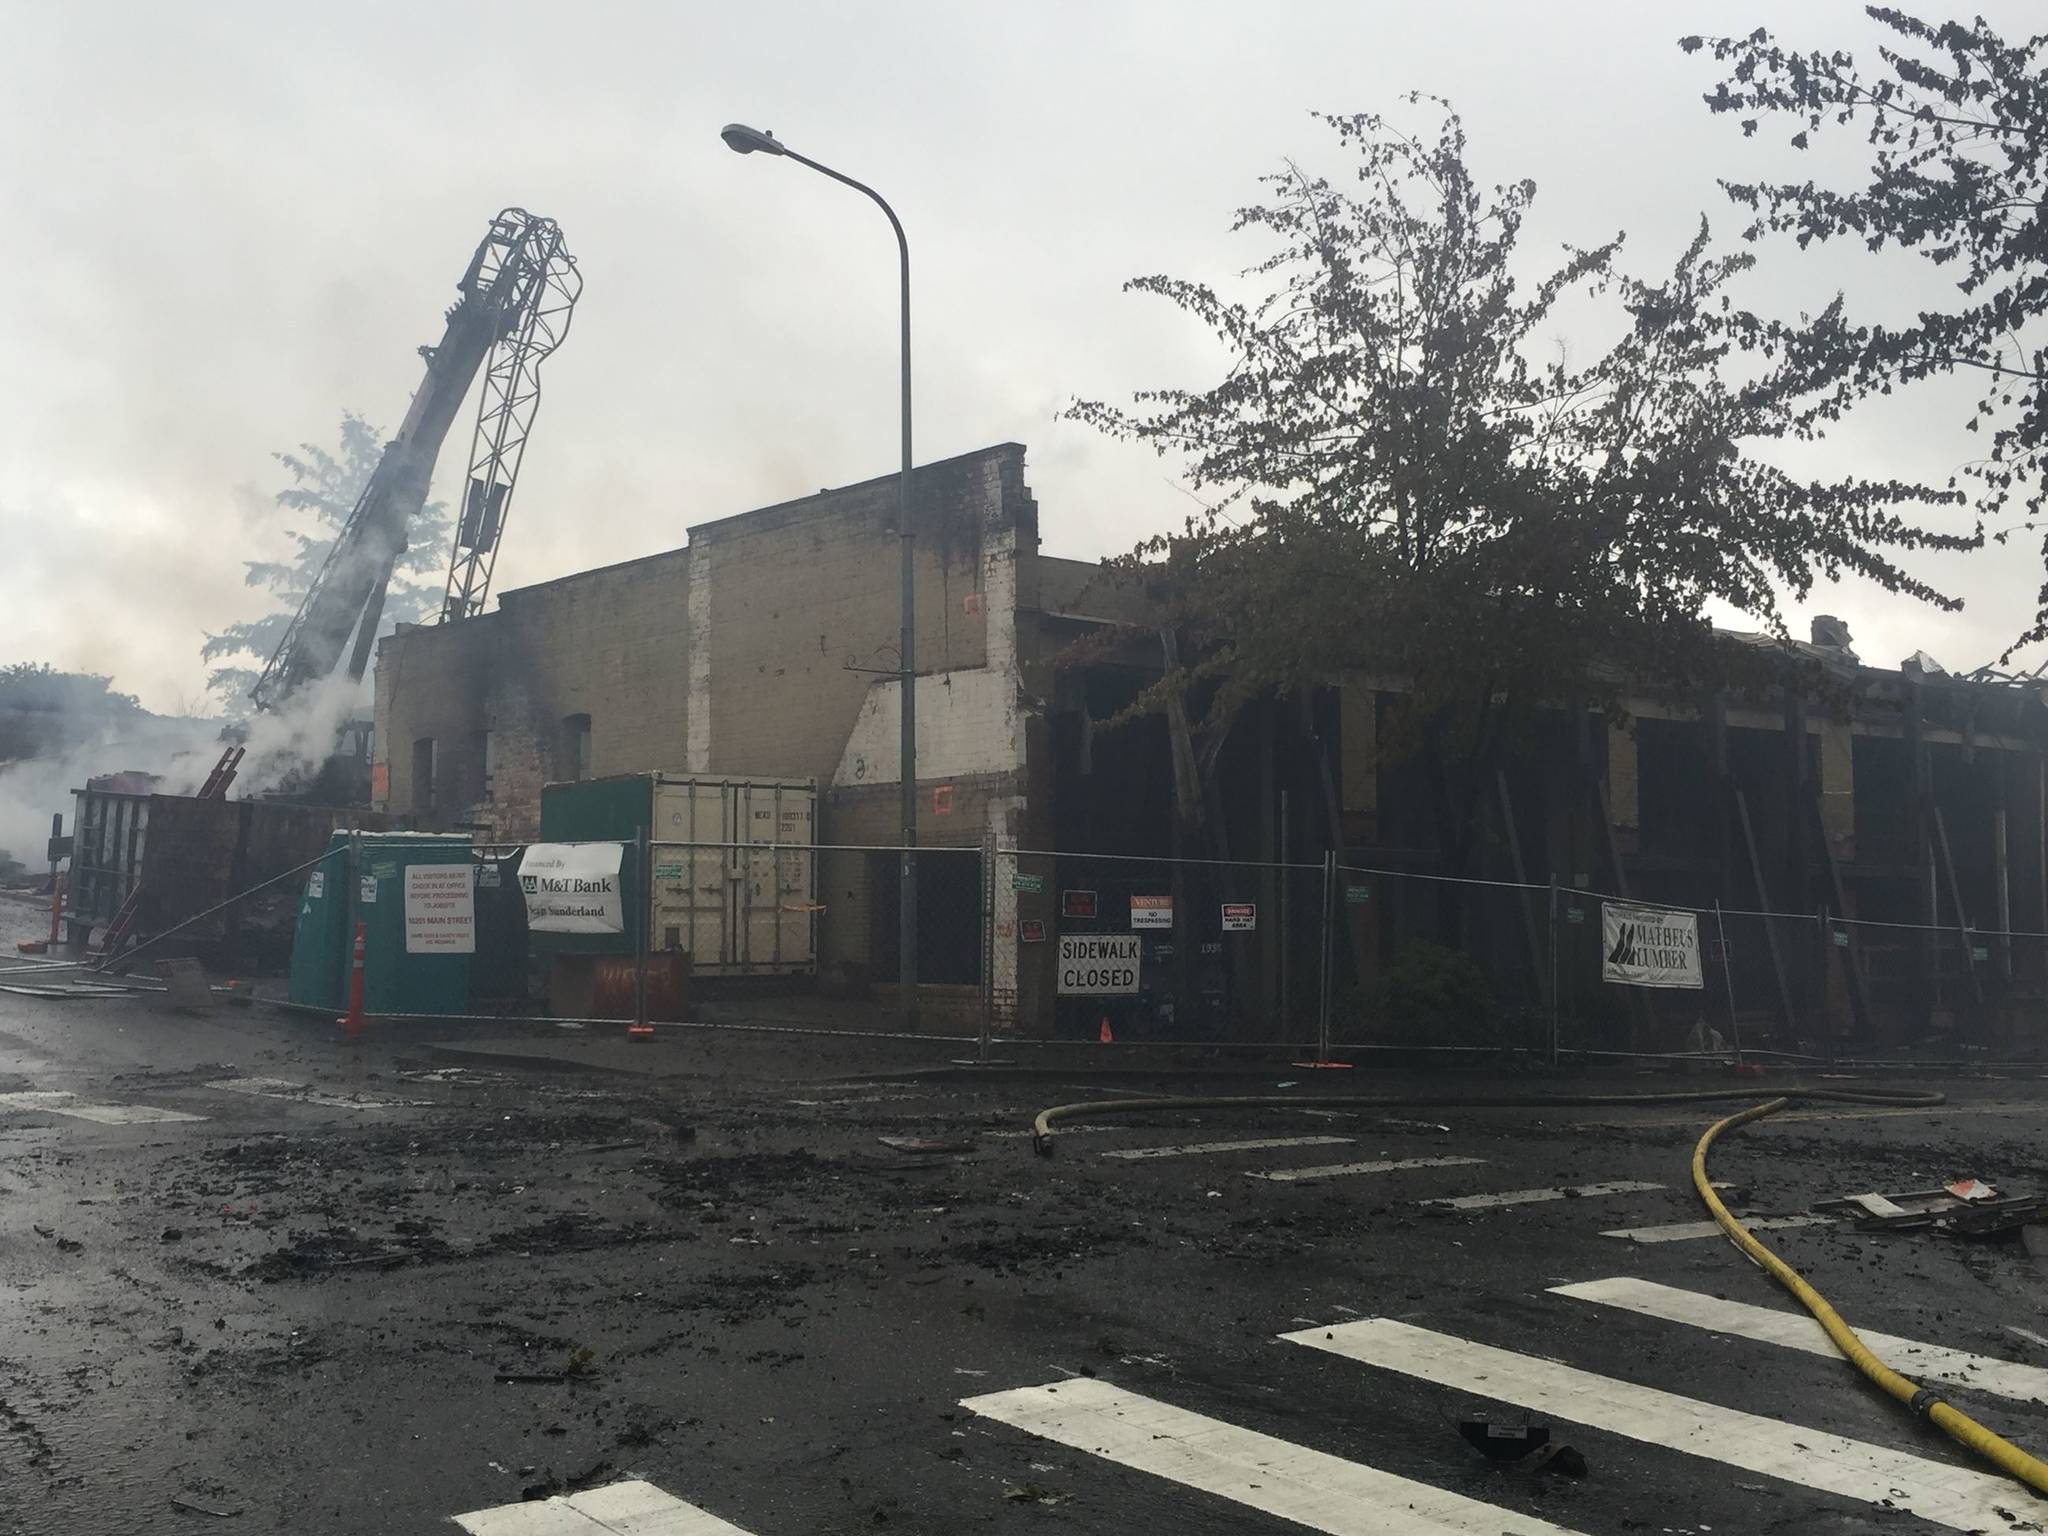 The July 22 Main Street fire destroyed the Bothell Mall building and damaged several neighboring buildings. Submitted photo